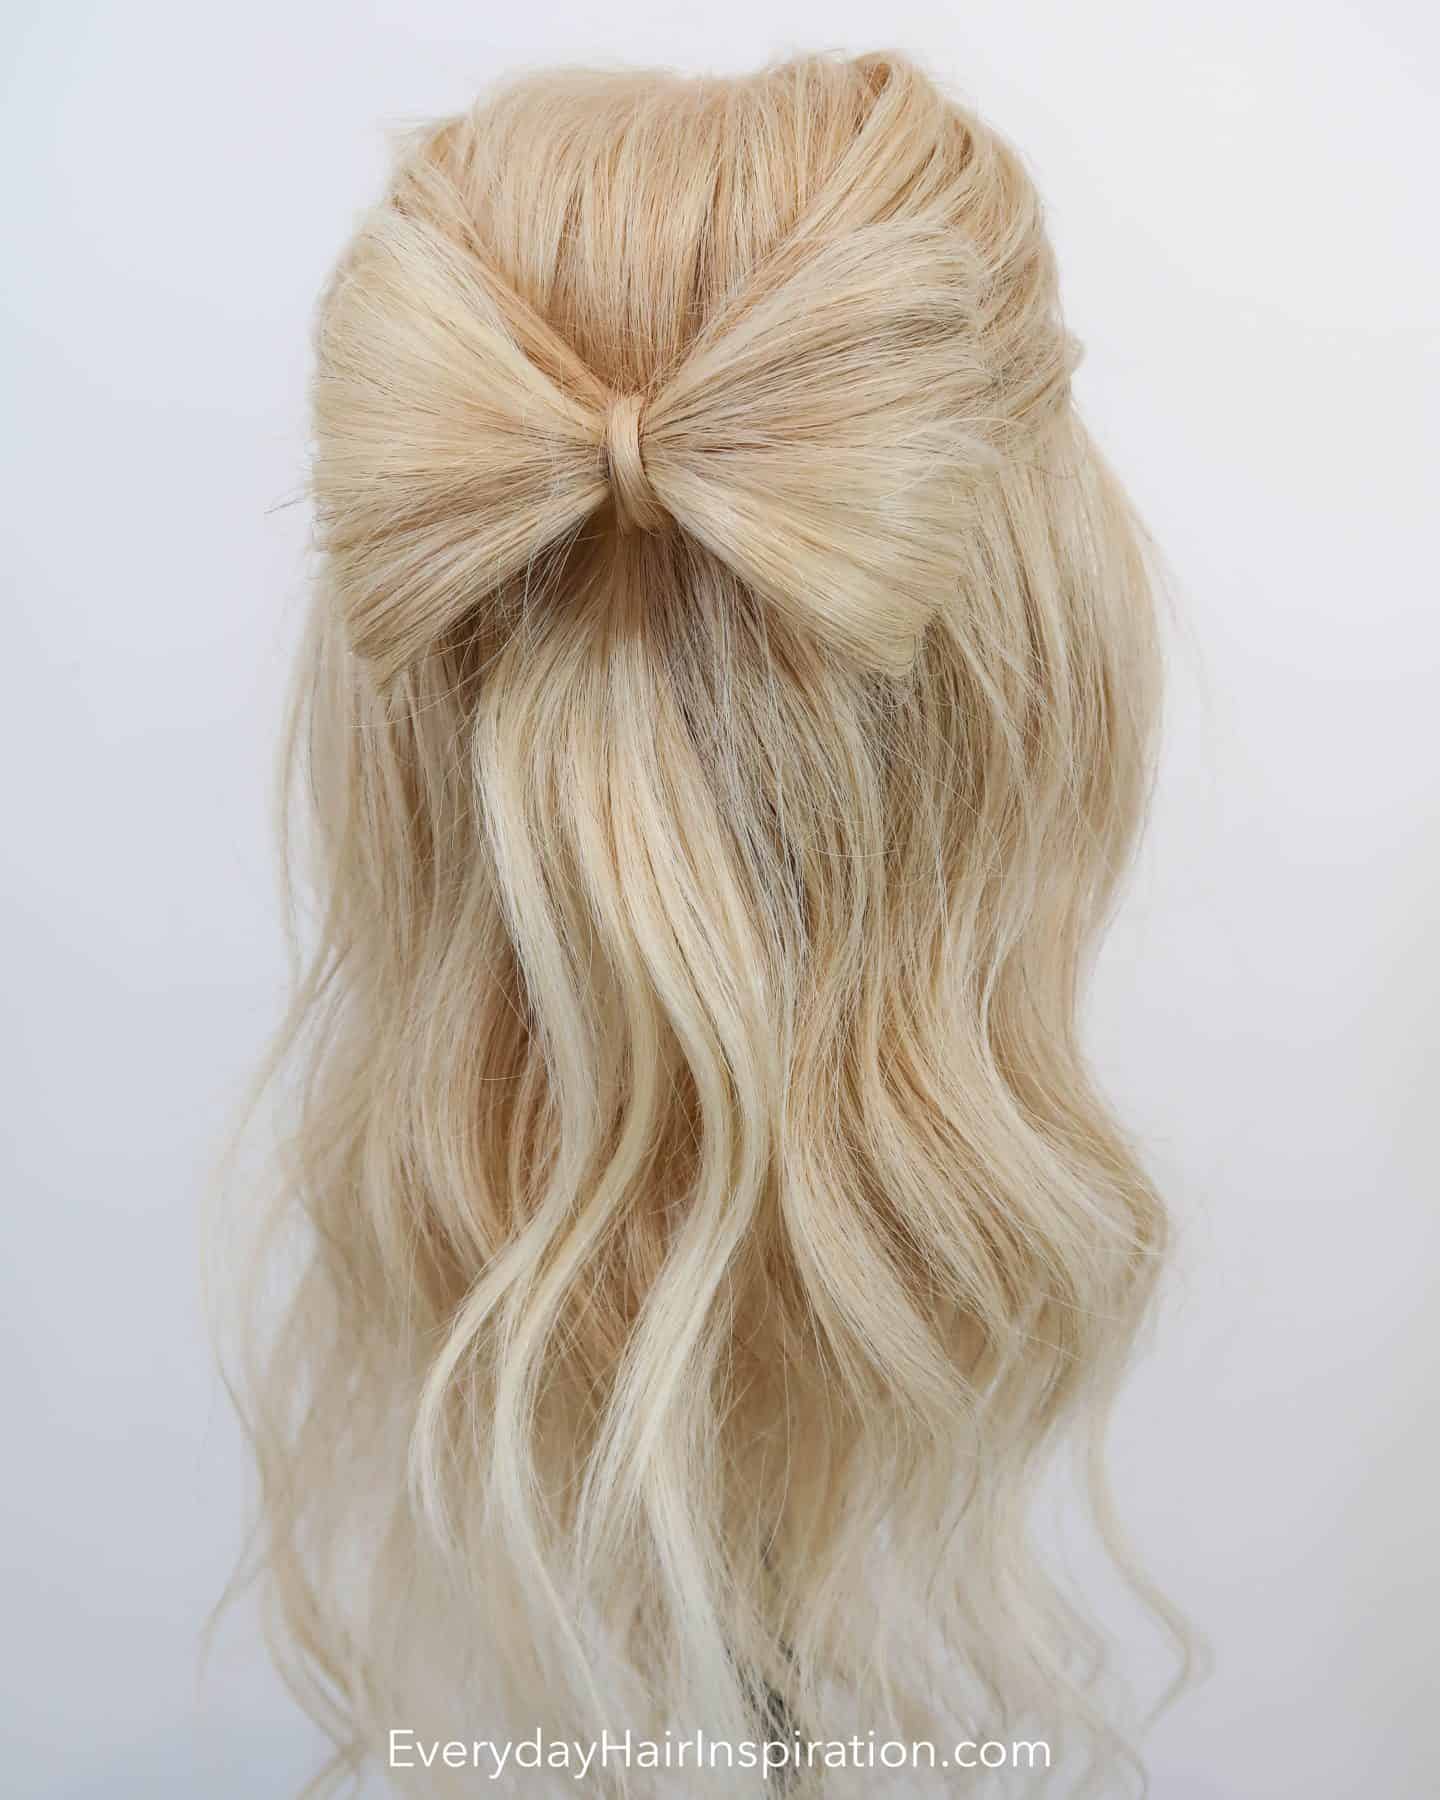 Hairstyle Tutorial: How To Make A Hair Bow #Beauty » Penelope Guzman New  York Freelance Writer and Photographer